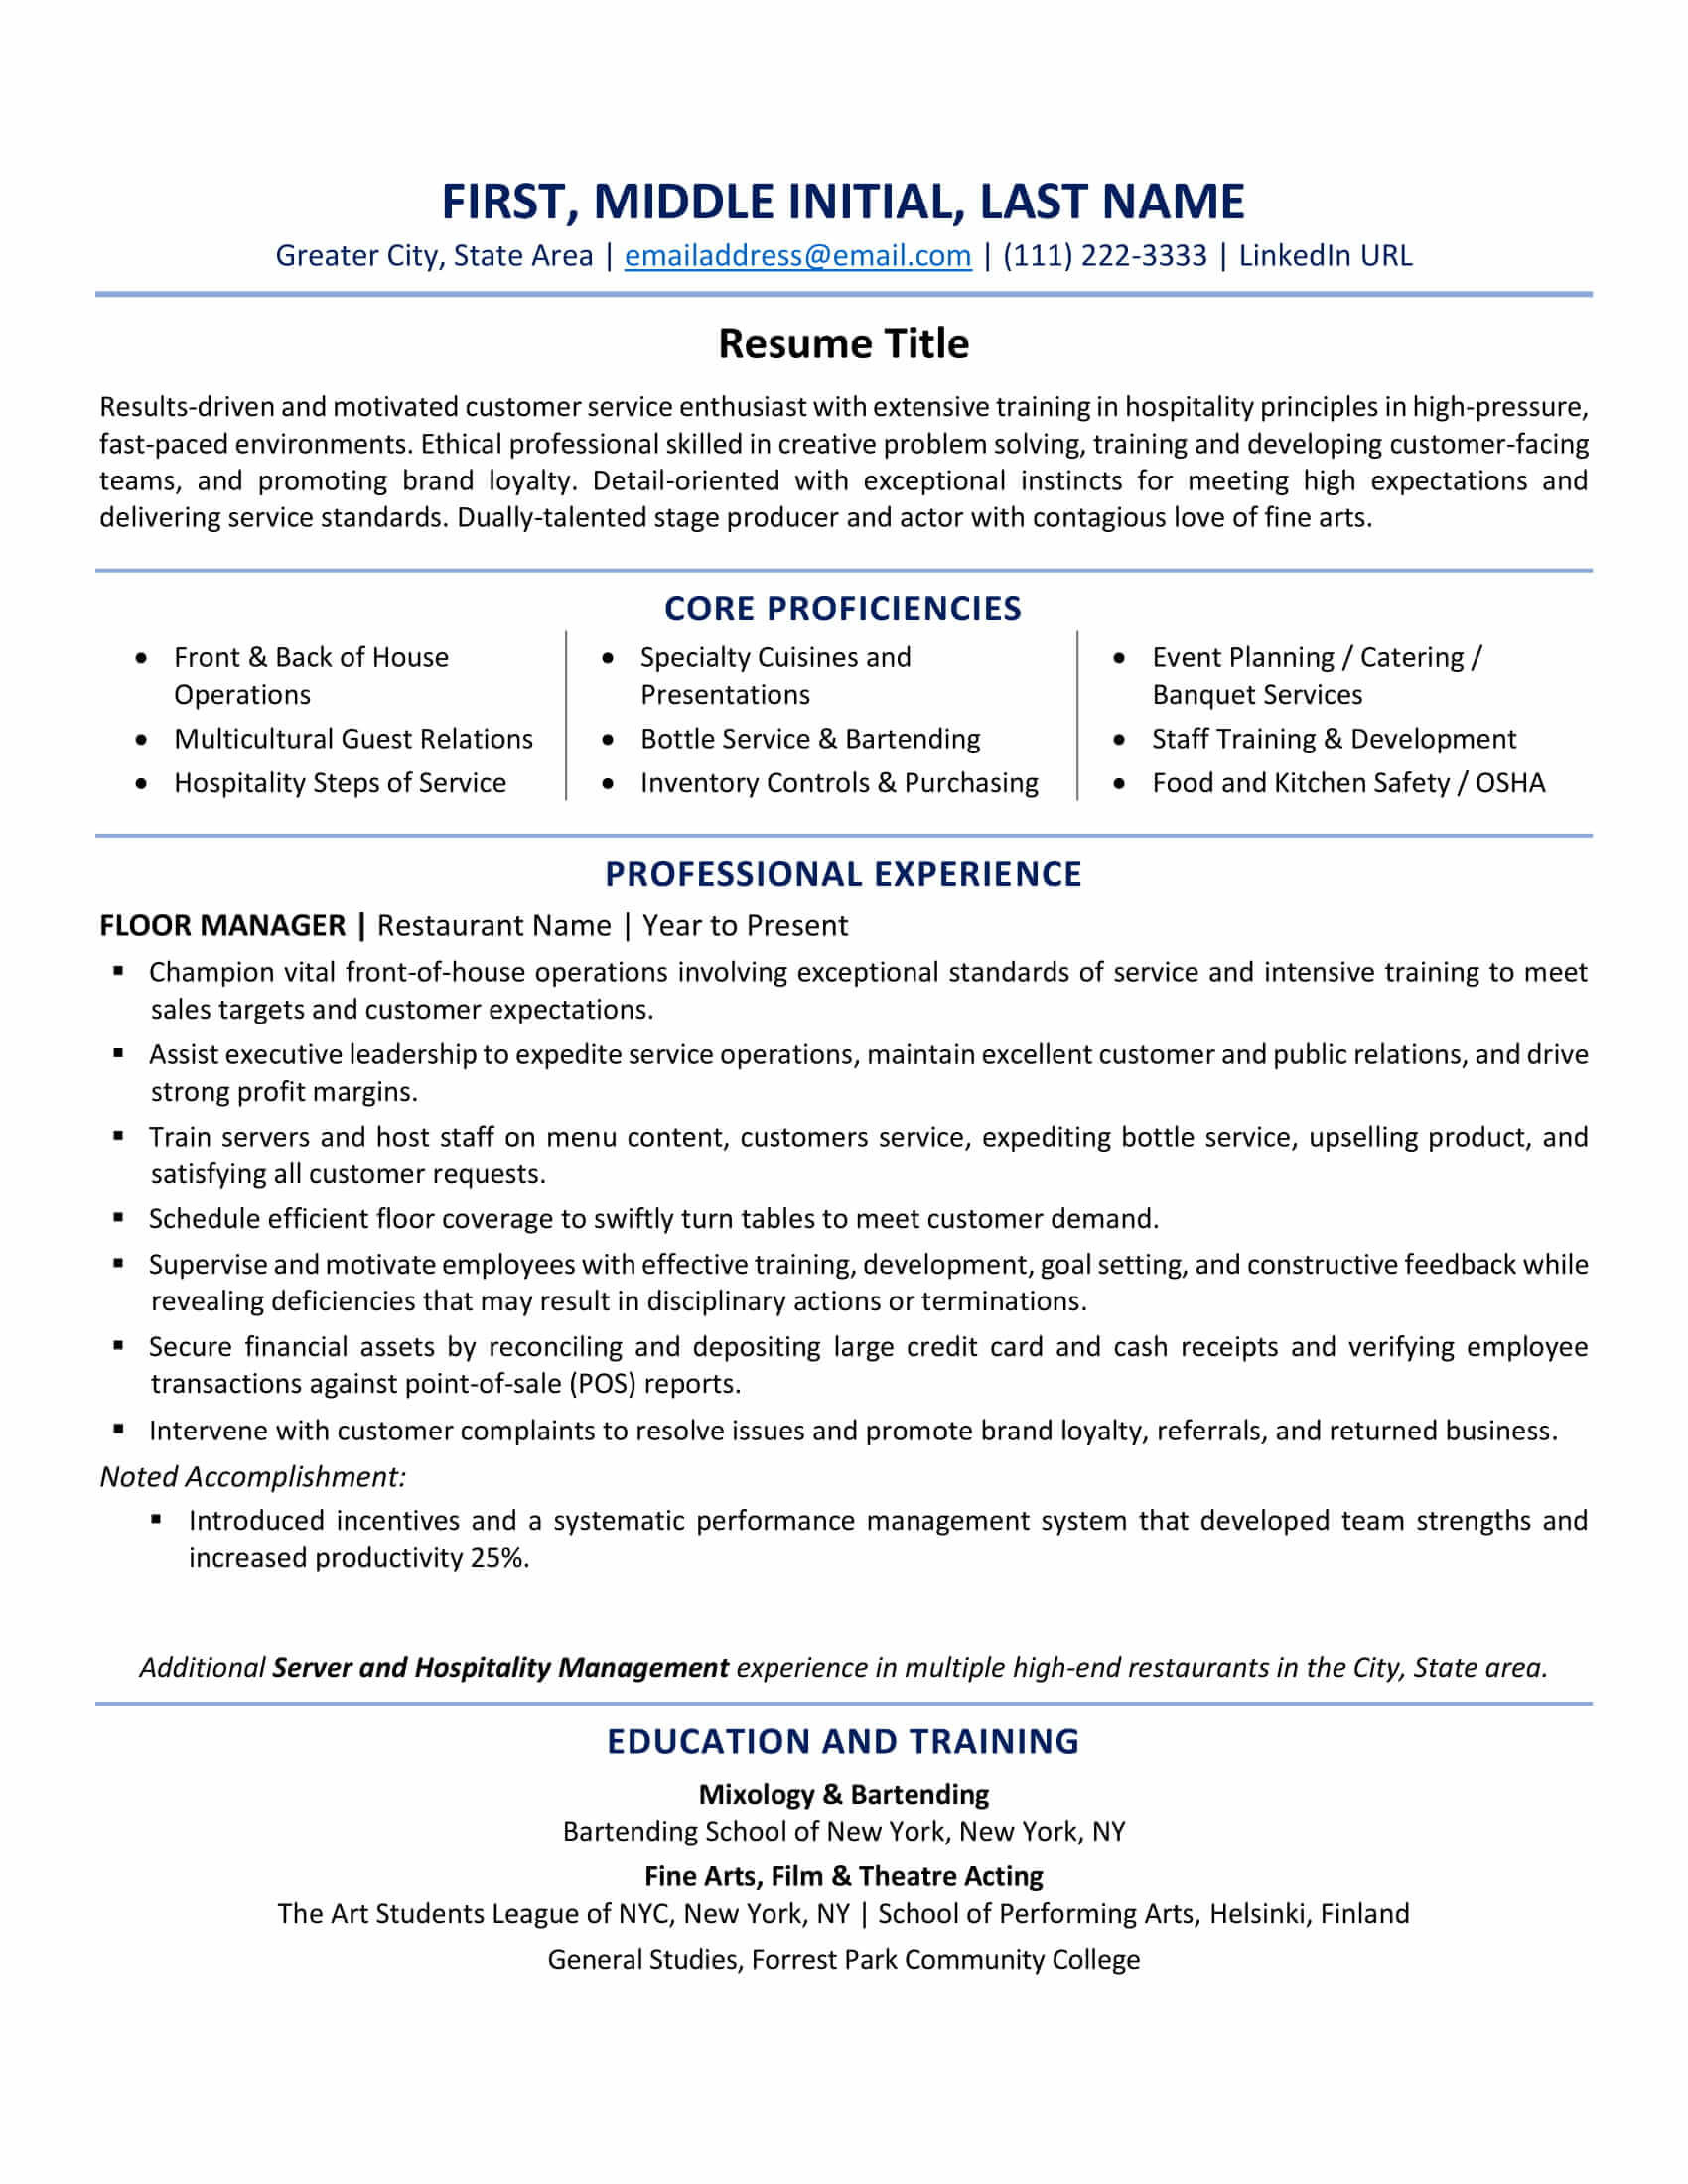 Resume Samples Canada for It Professionals 7 No-fail Resume Tips for Older Workers (lancarrezekiq Examples) Zipjob